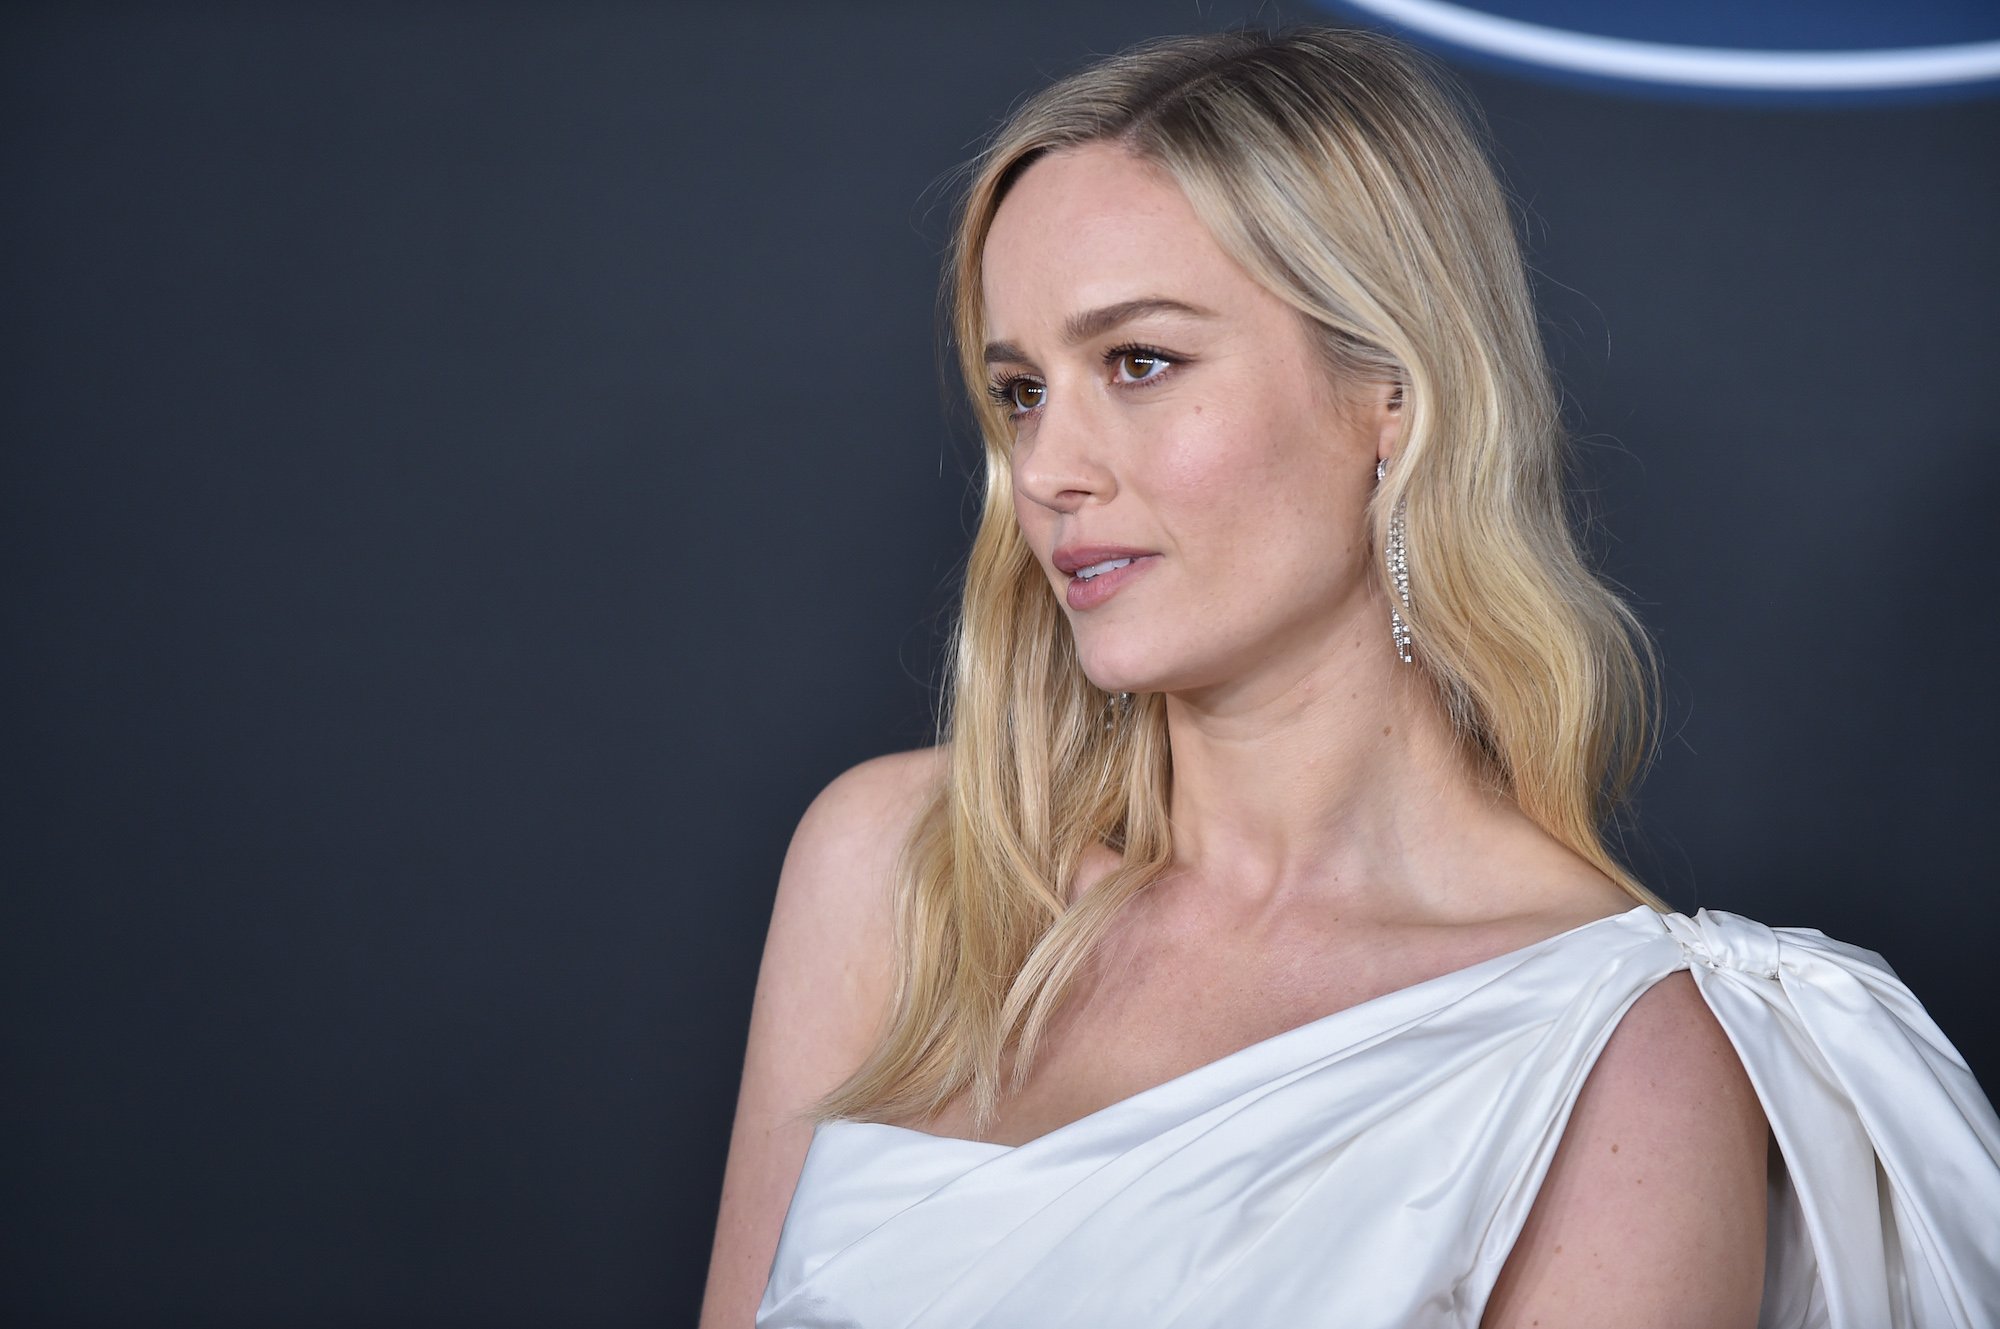 Brie Larson at the 51st NAACP Image Awards on Feb. 22, 2020.